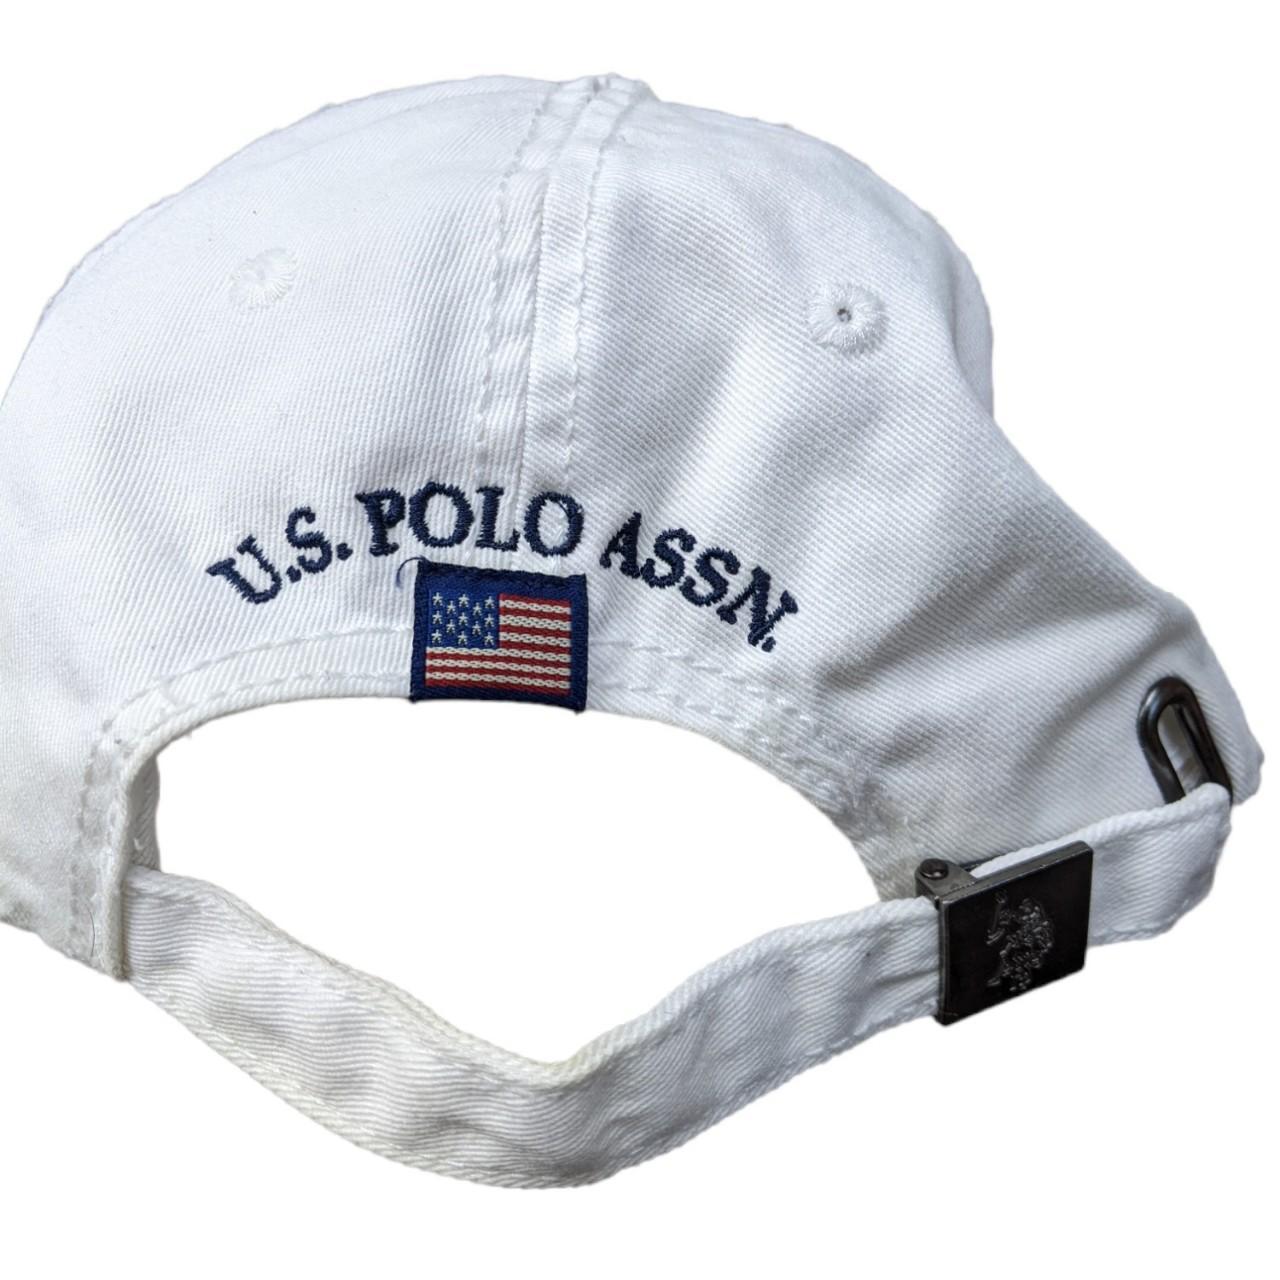 U.S. Polo Assn. Men's White and Brown Hat (4)